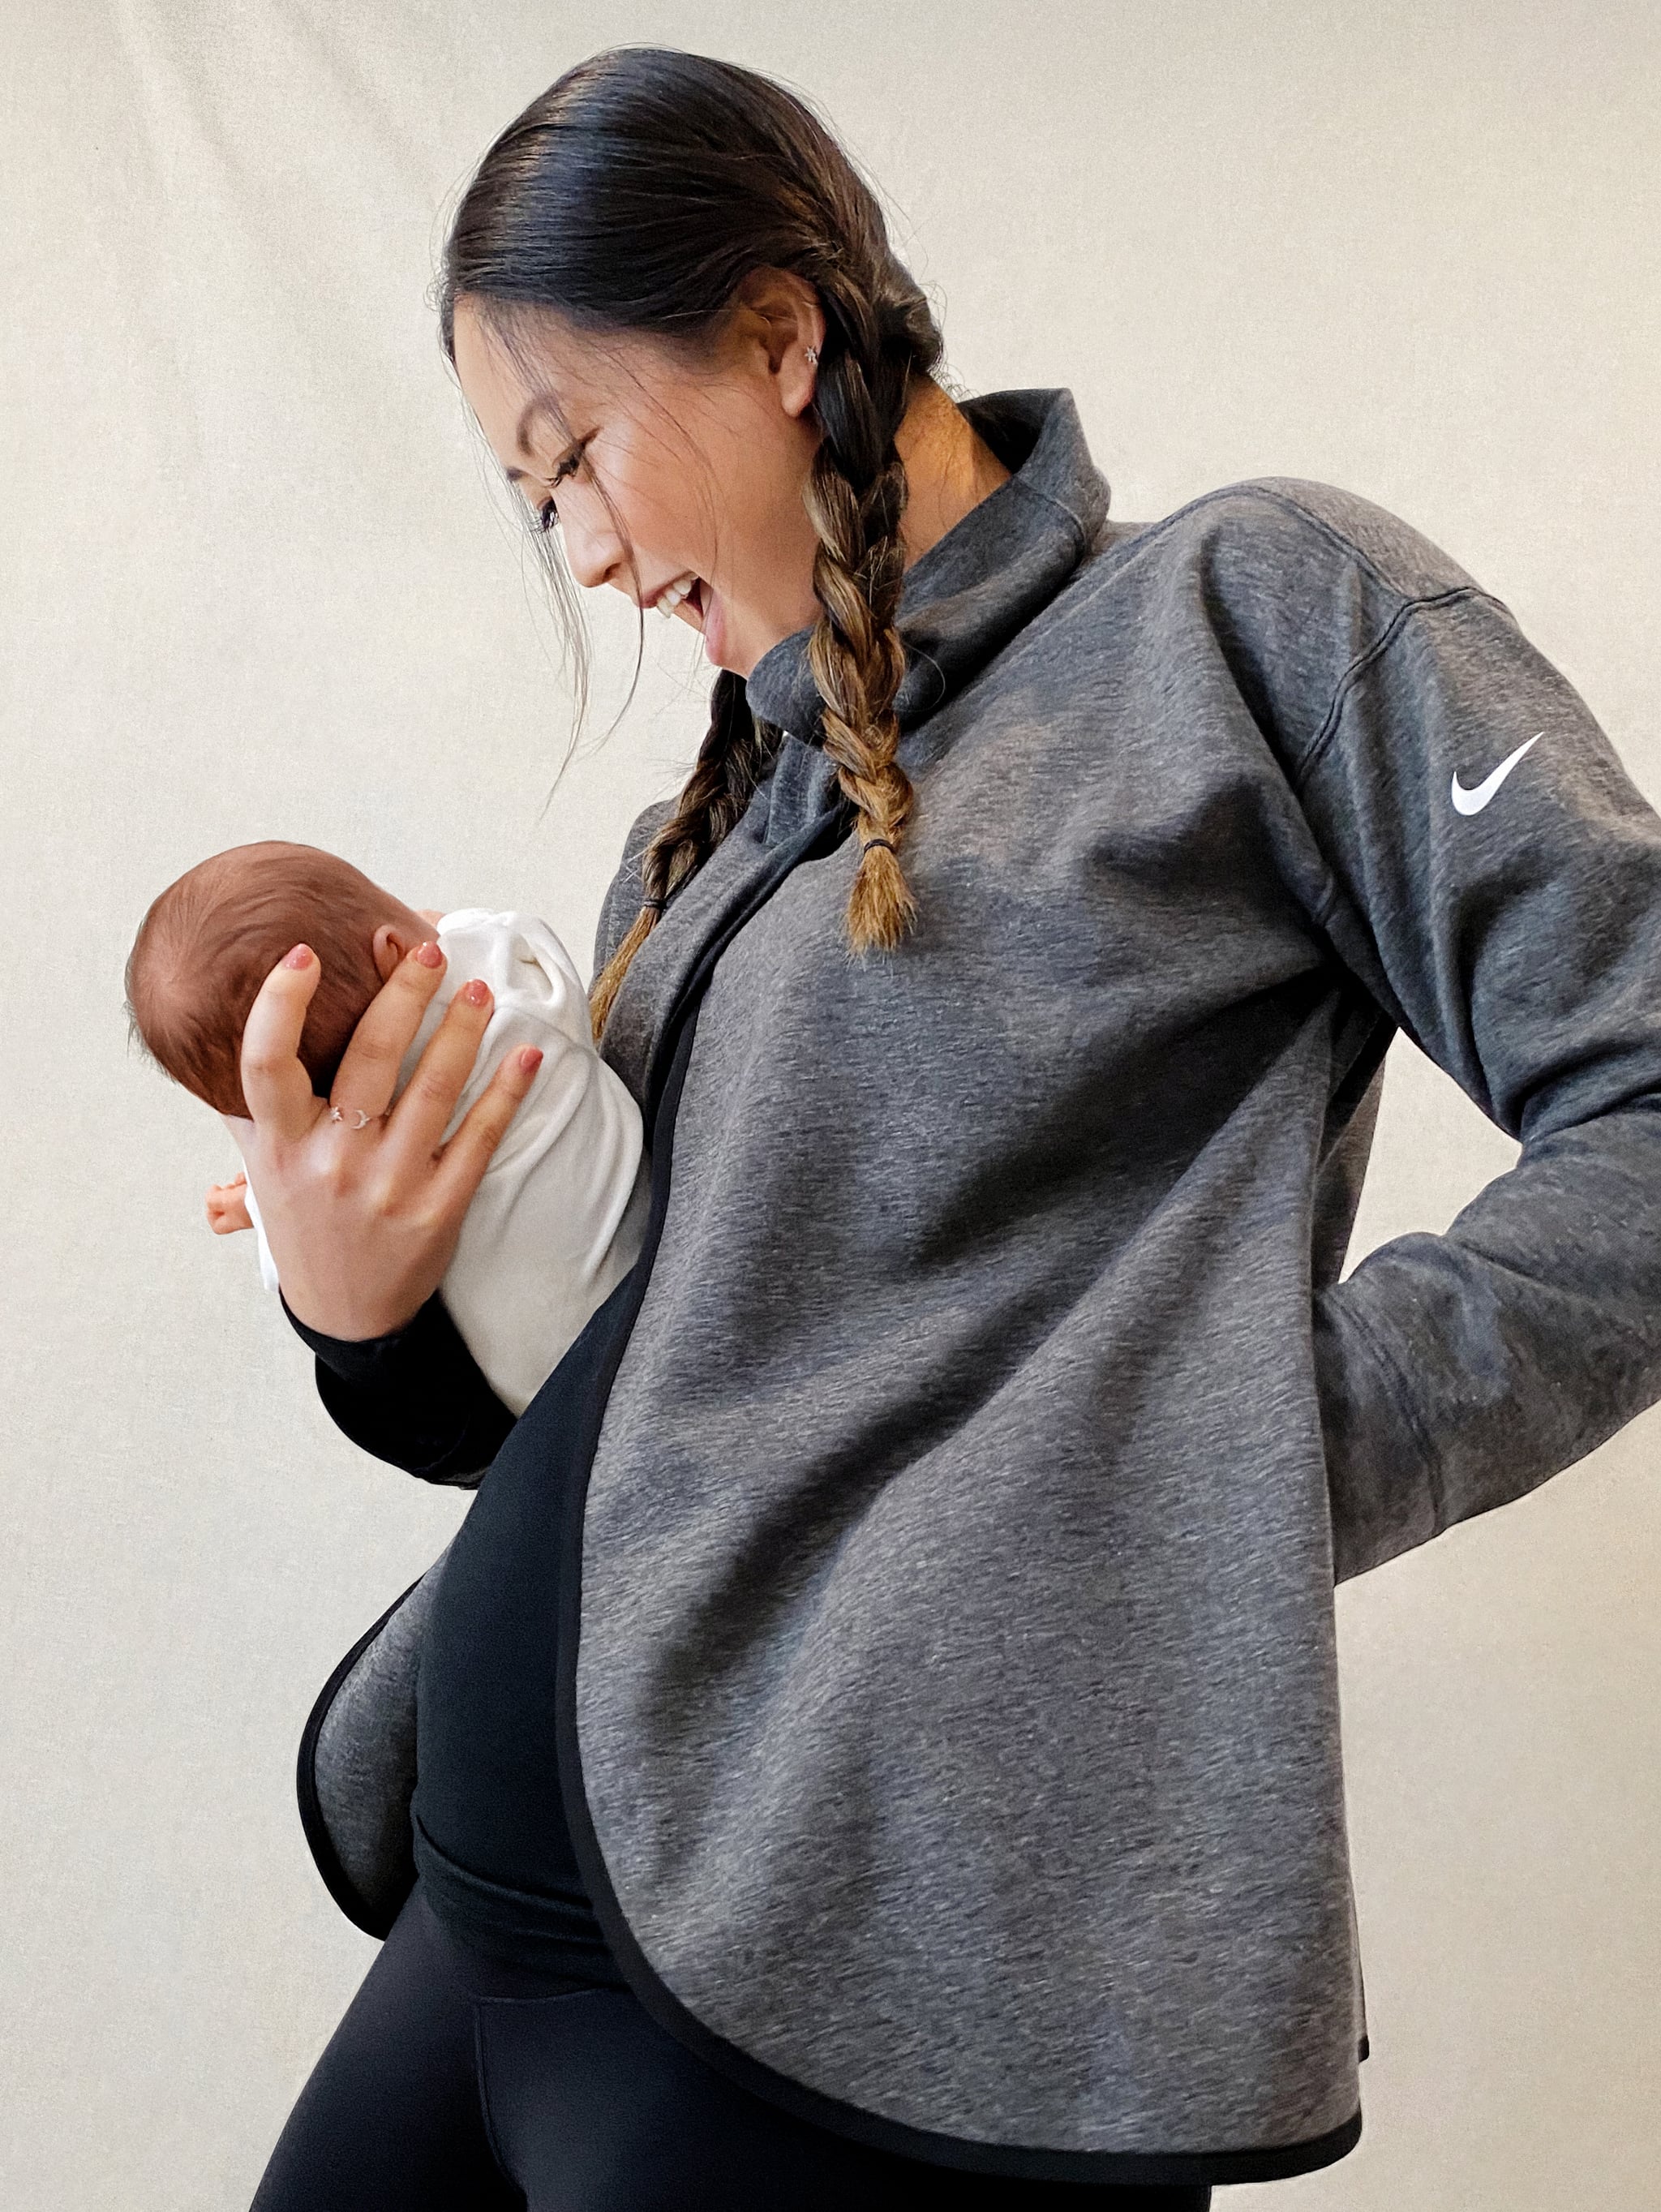 maternity workout clothes nike